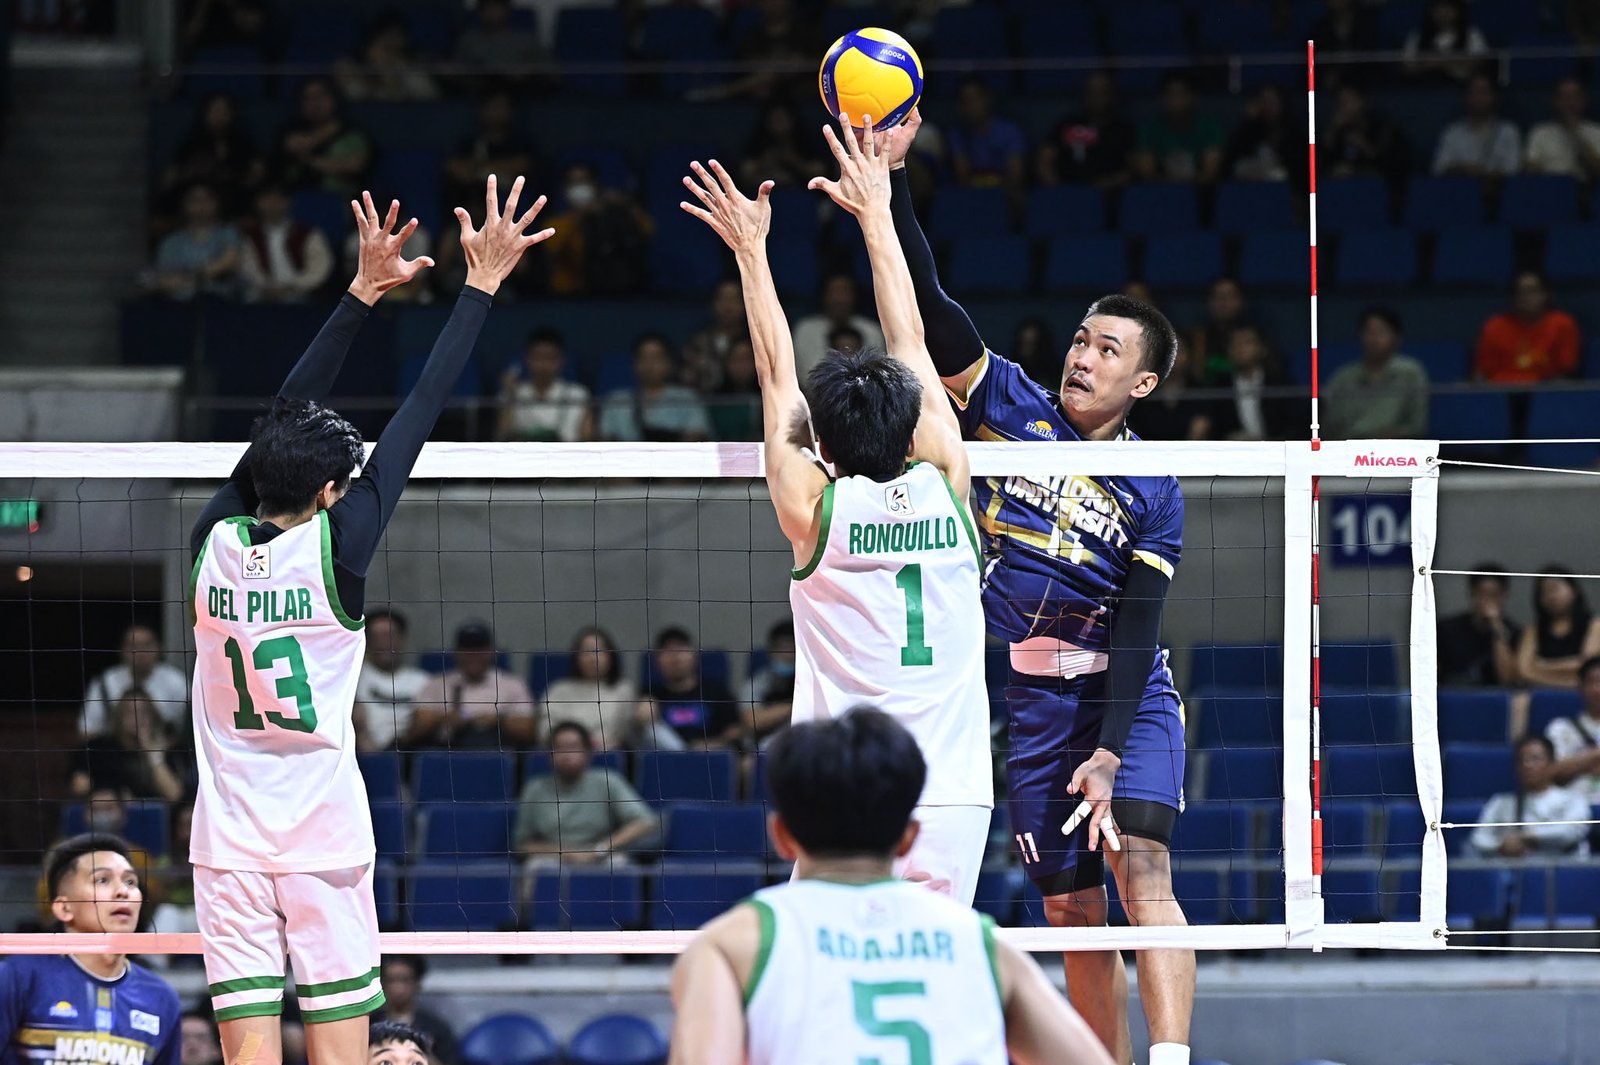 NU posts 6th straight win, downs La Salle in UAAP men’s volleyball